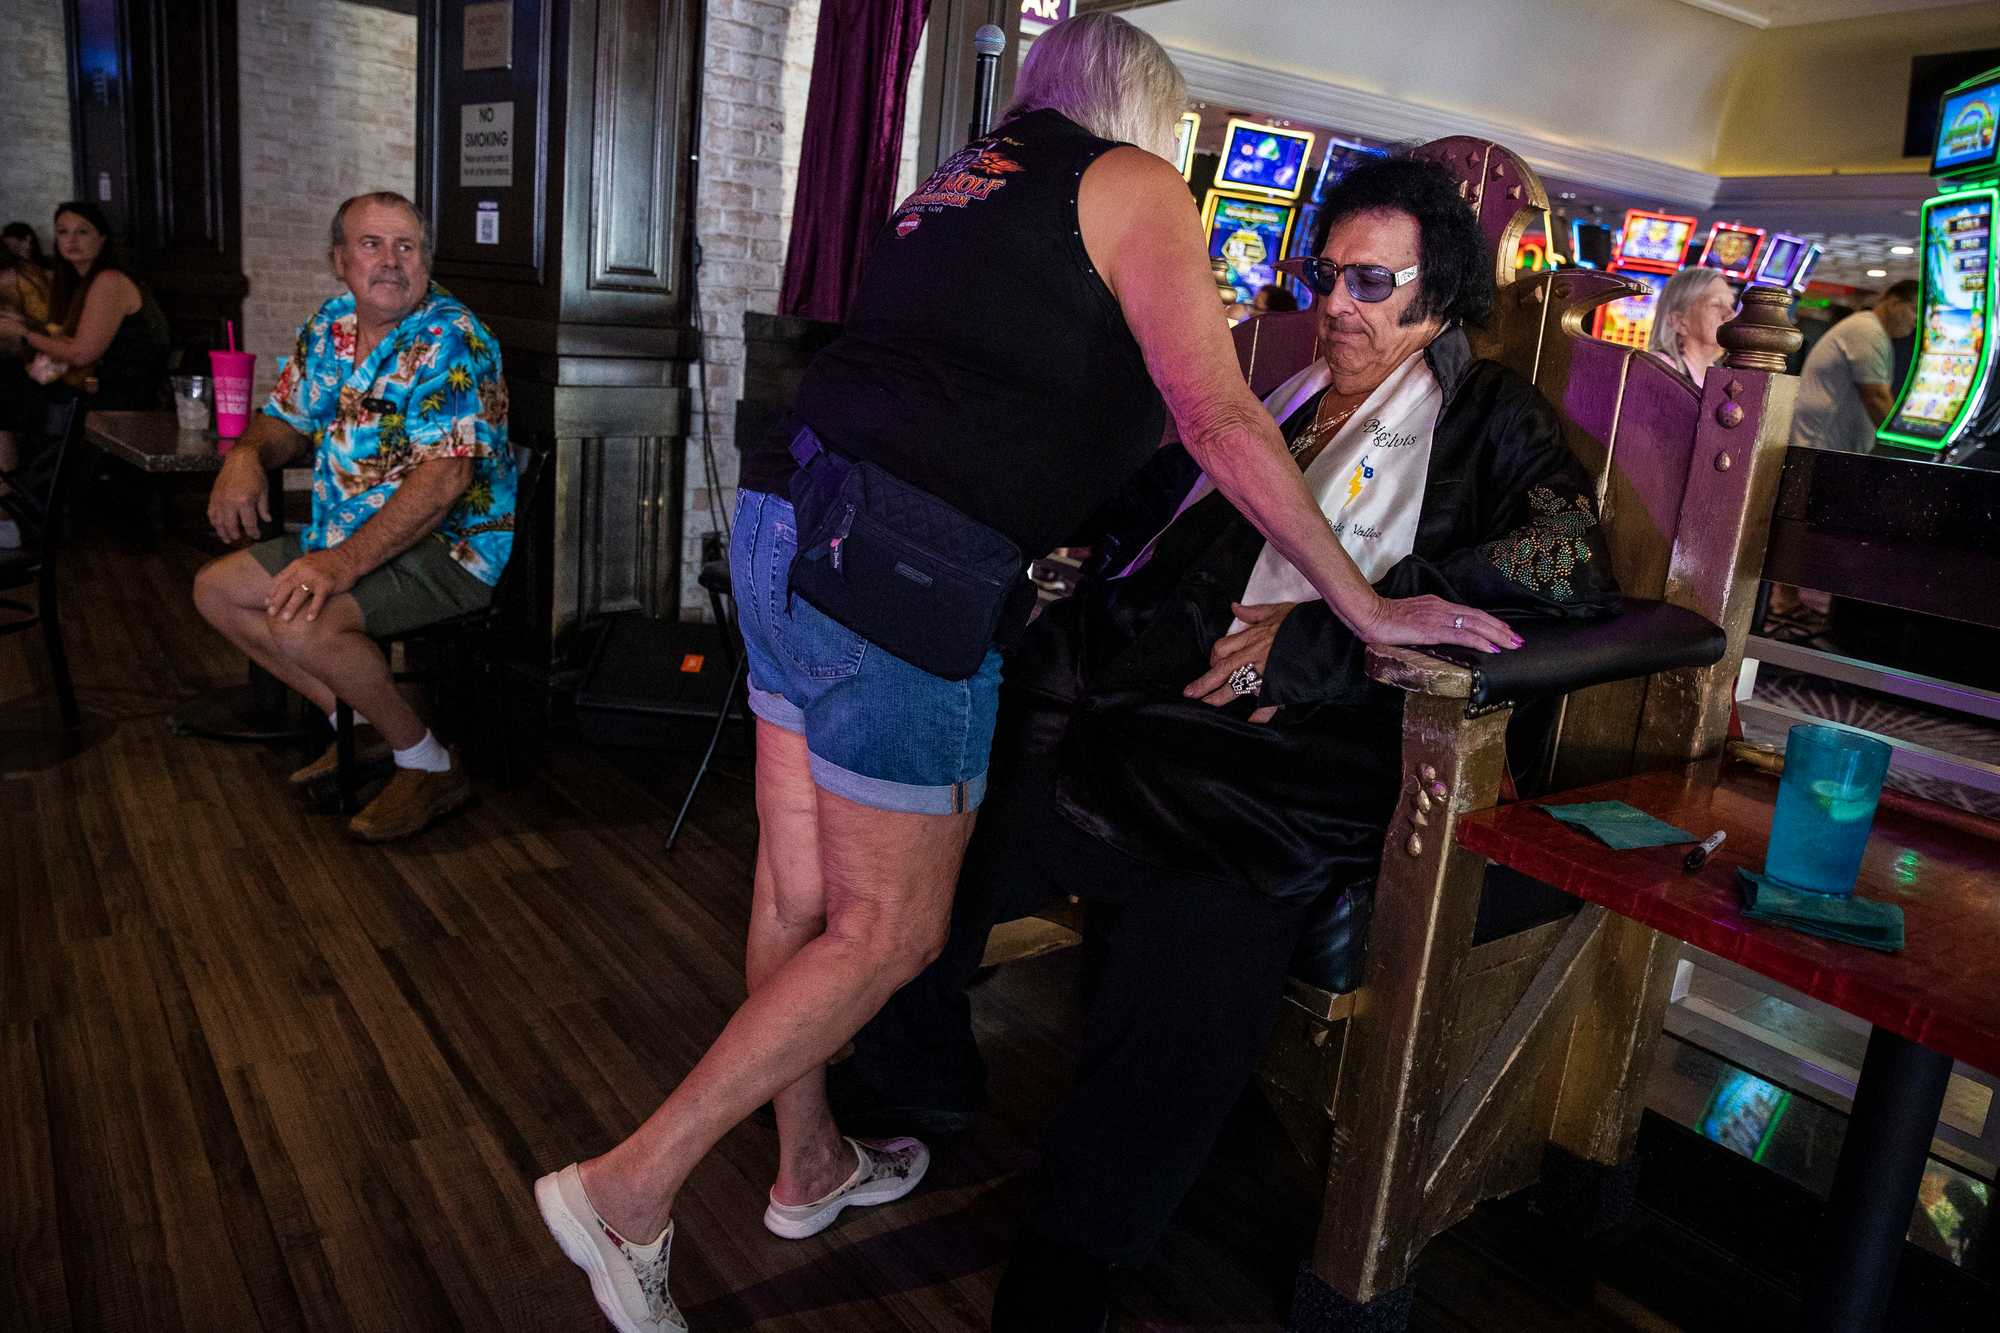 Nancy Weyer leaned over Big Elvis, a.k.a. Pete Vallee, while her new husband looked on, at Harrah's in September.

